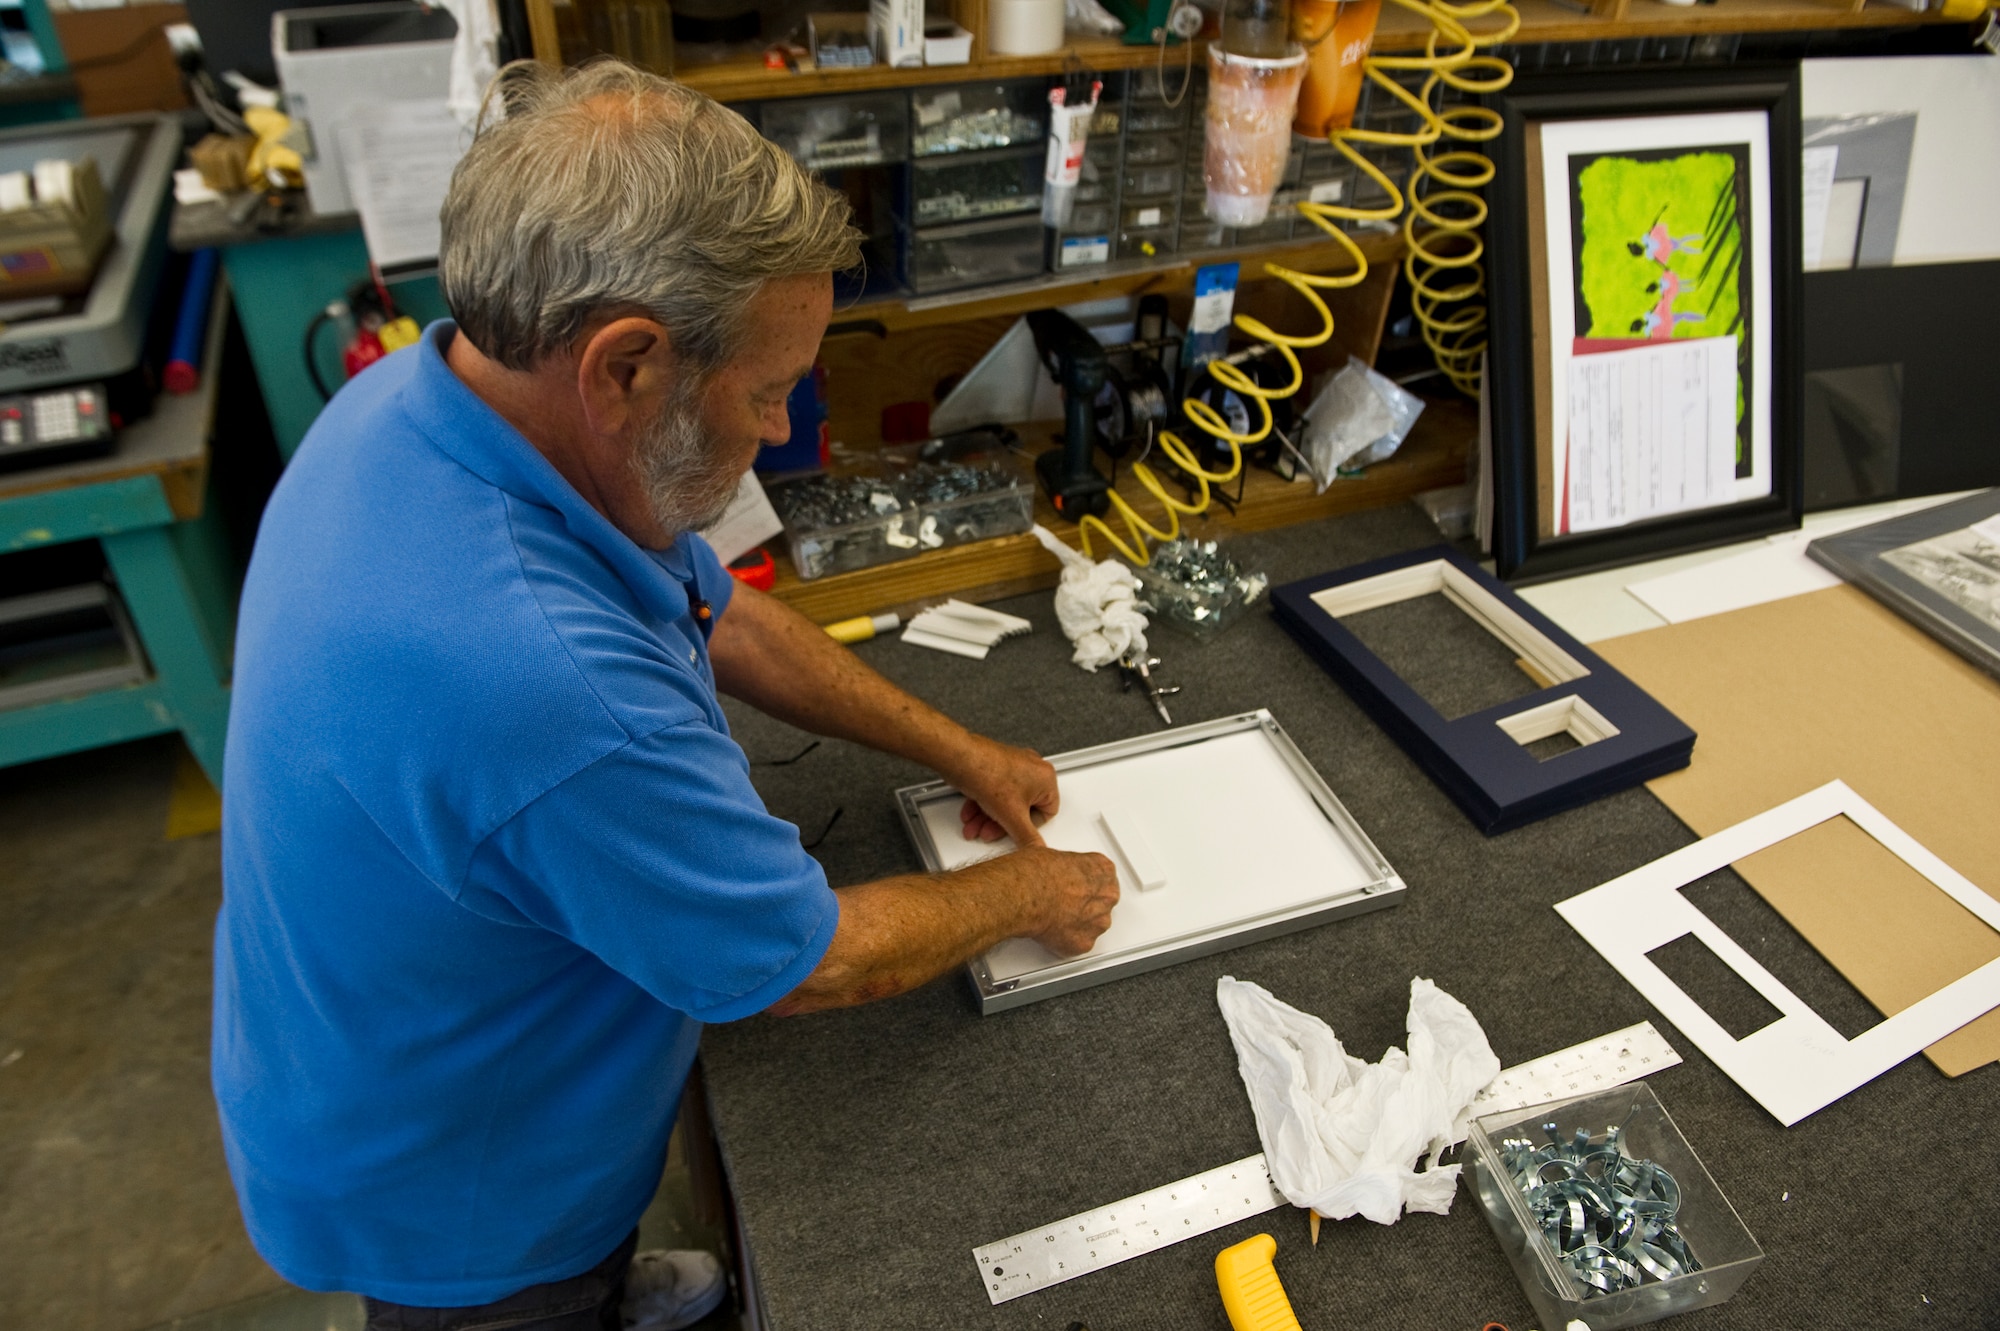 Dan Ruddell, manager of The Frame Shop, places a spacer between two foam boards while working on a custom frame at The Frame Shop on Hurlburt Field, Fla., Oct. 12, 2012. The shop has a typical turnaround time of two weeks on special custom designs. (U.S. Air Force photo/Airman 1st Class Christopher Williams)
